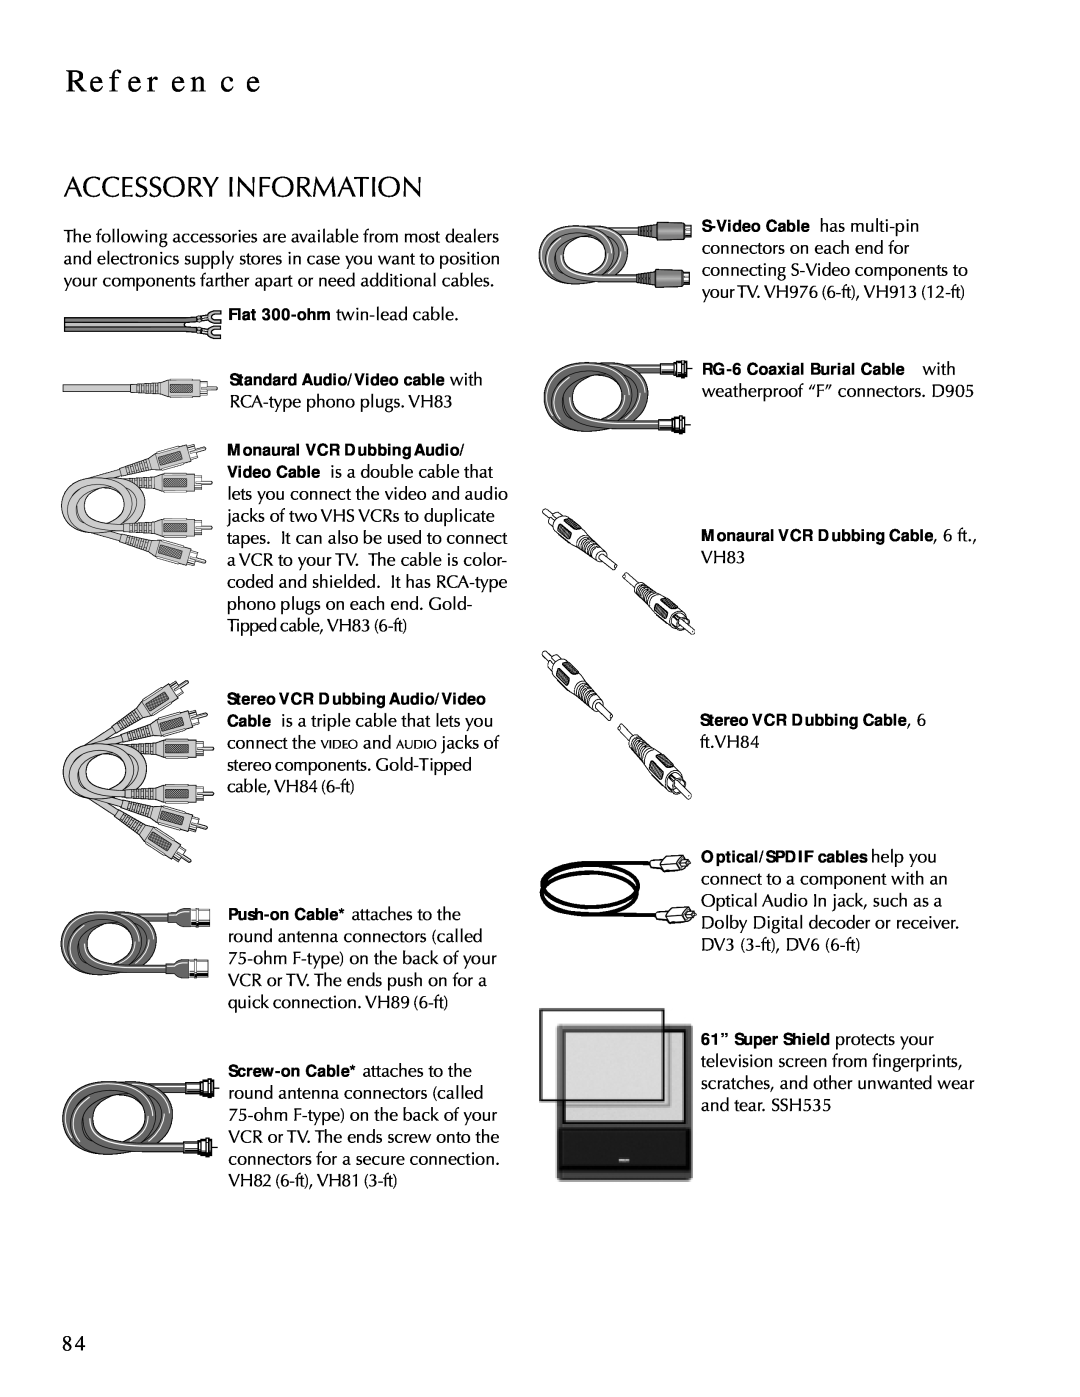 DirecTV HDTV user manual Accessory Information, Reference, Standard Audio/Video cable with, Stereo VCR Dubbing Audio/Video 